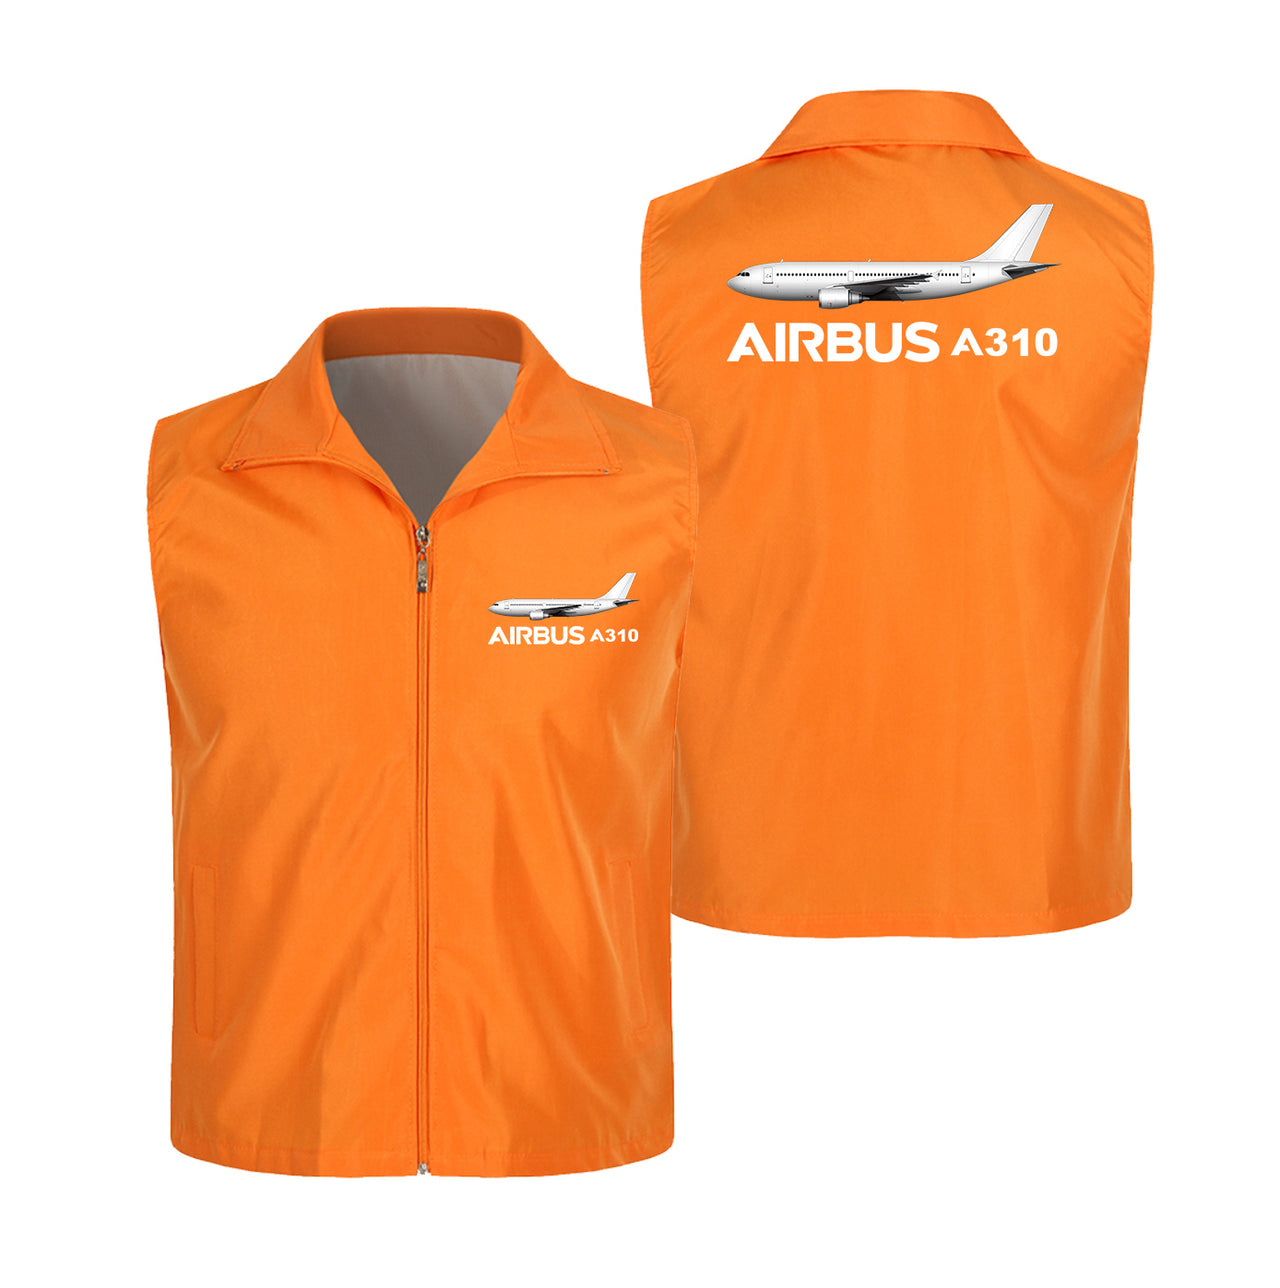 The Airbus A310 Designed Thin Style Vests